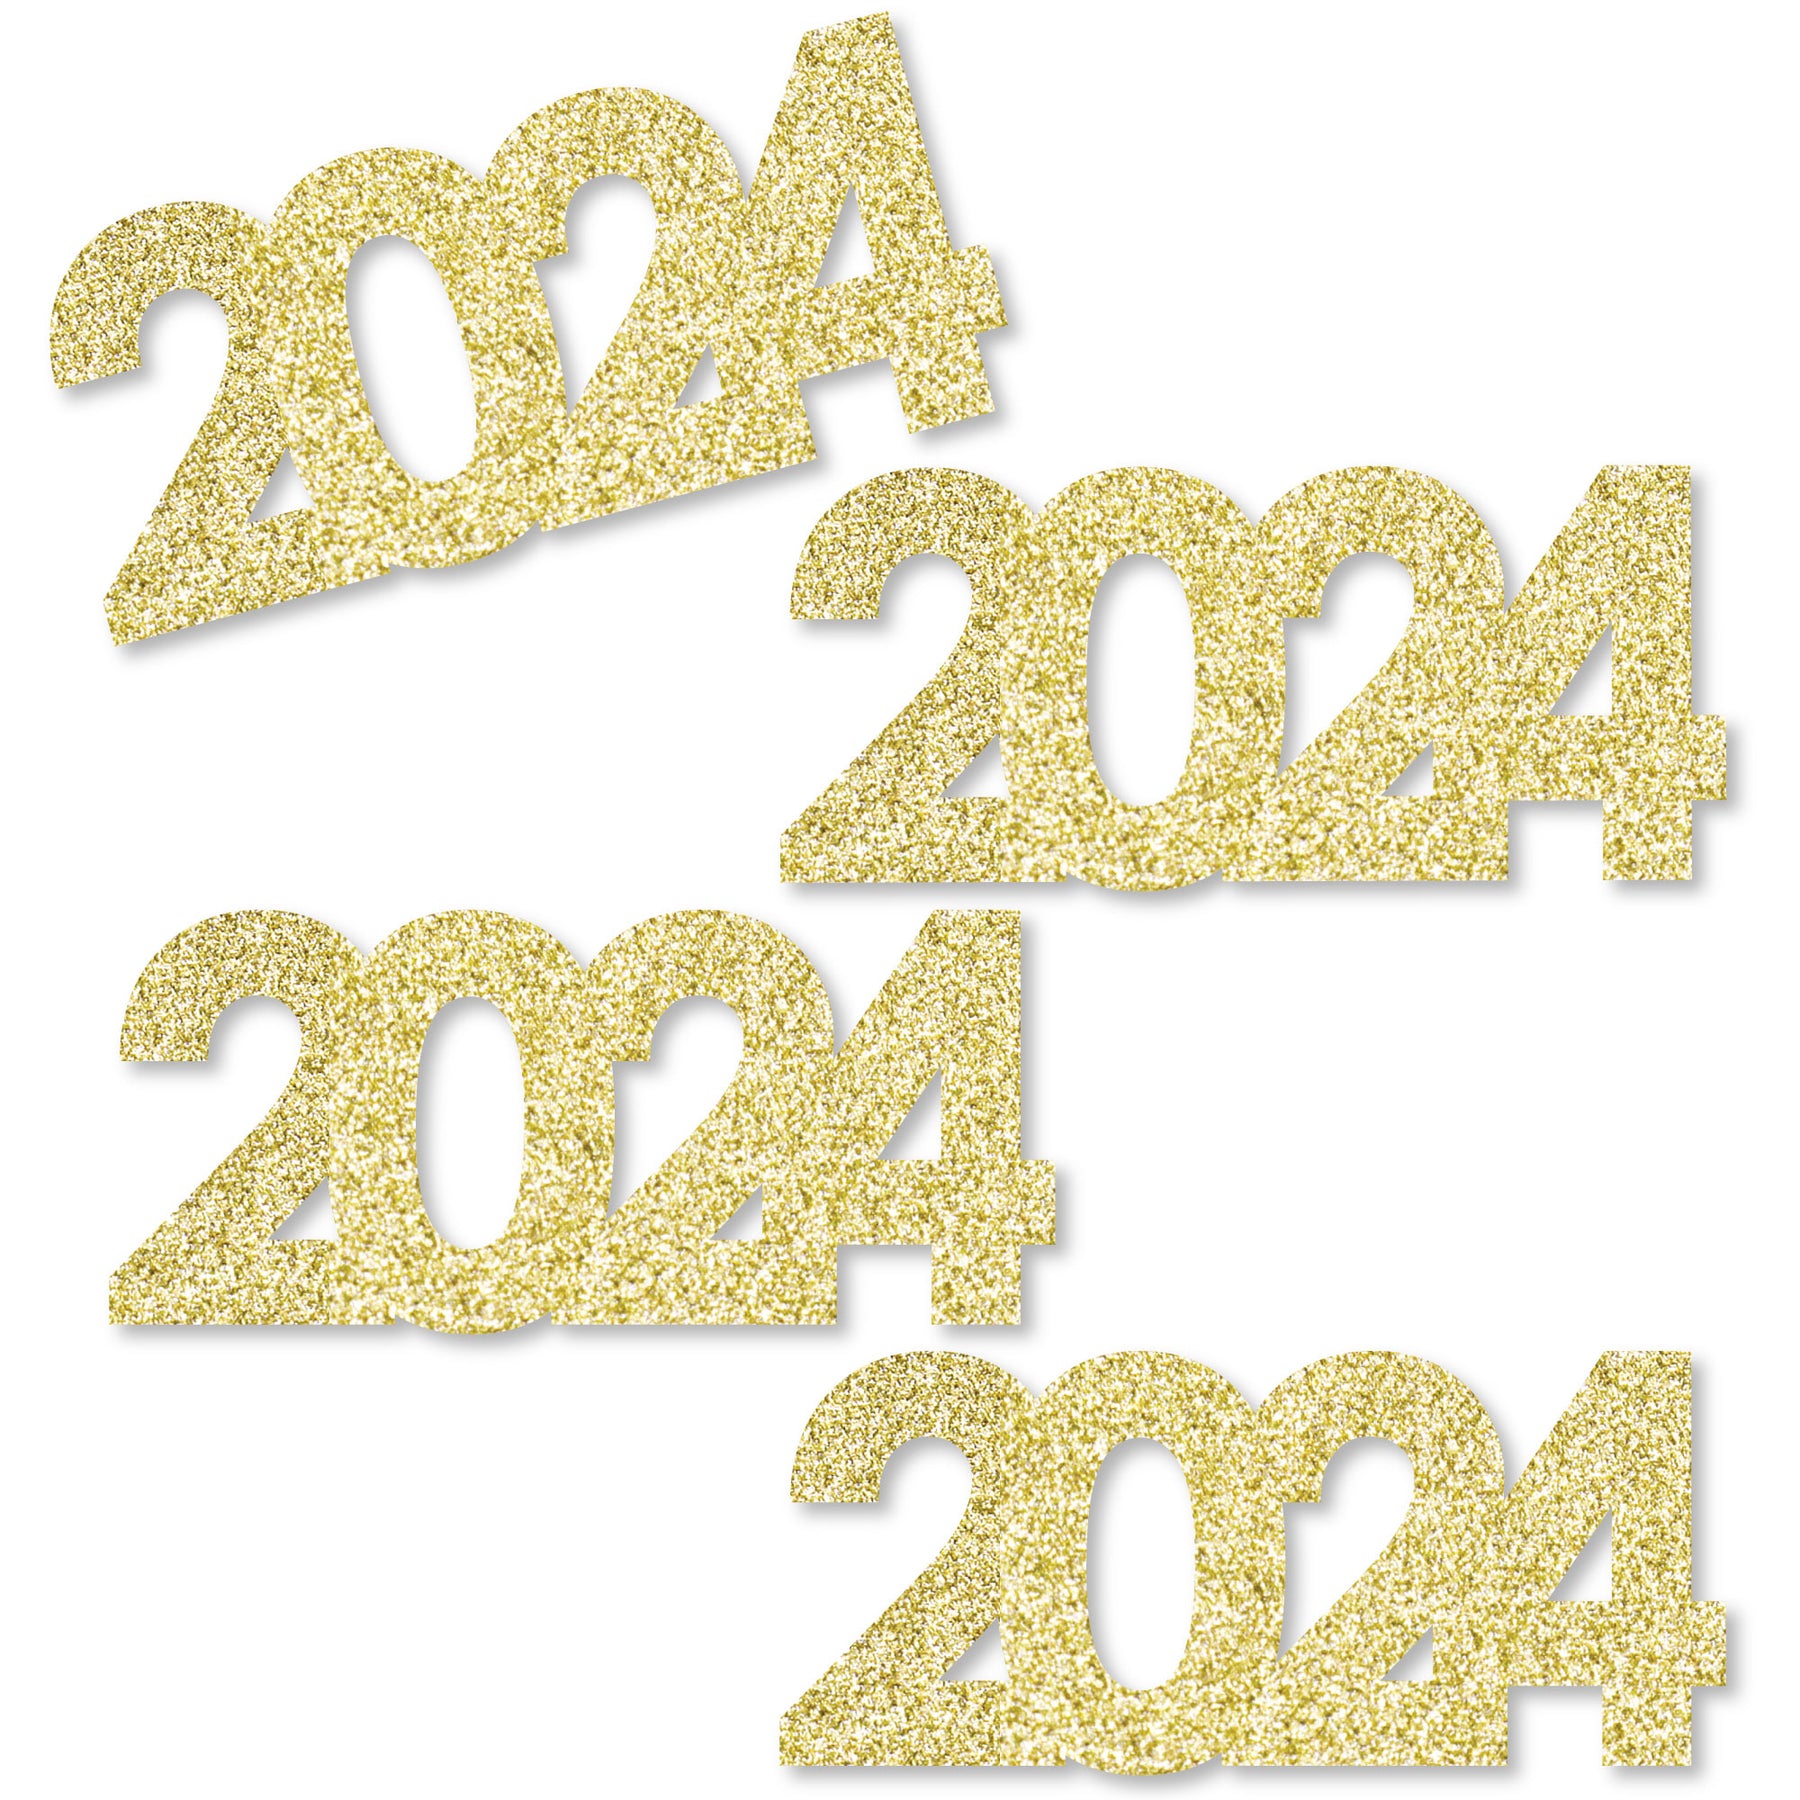 Big Glitter Number Stickers, Gold, 2-Inch, 26-Piece